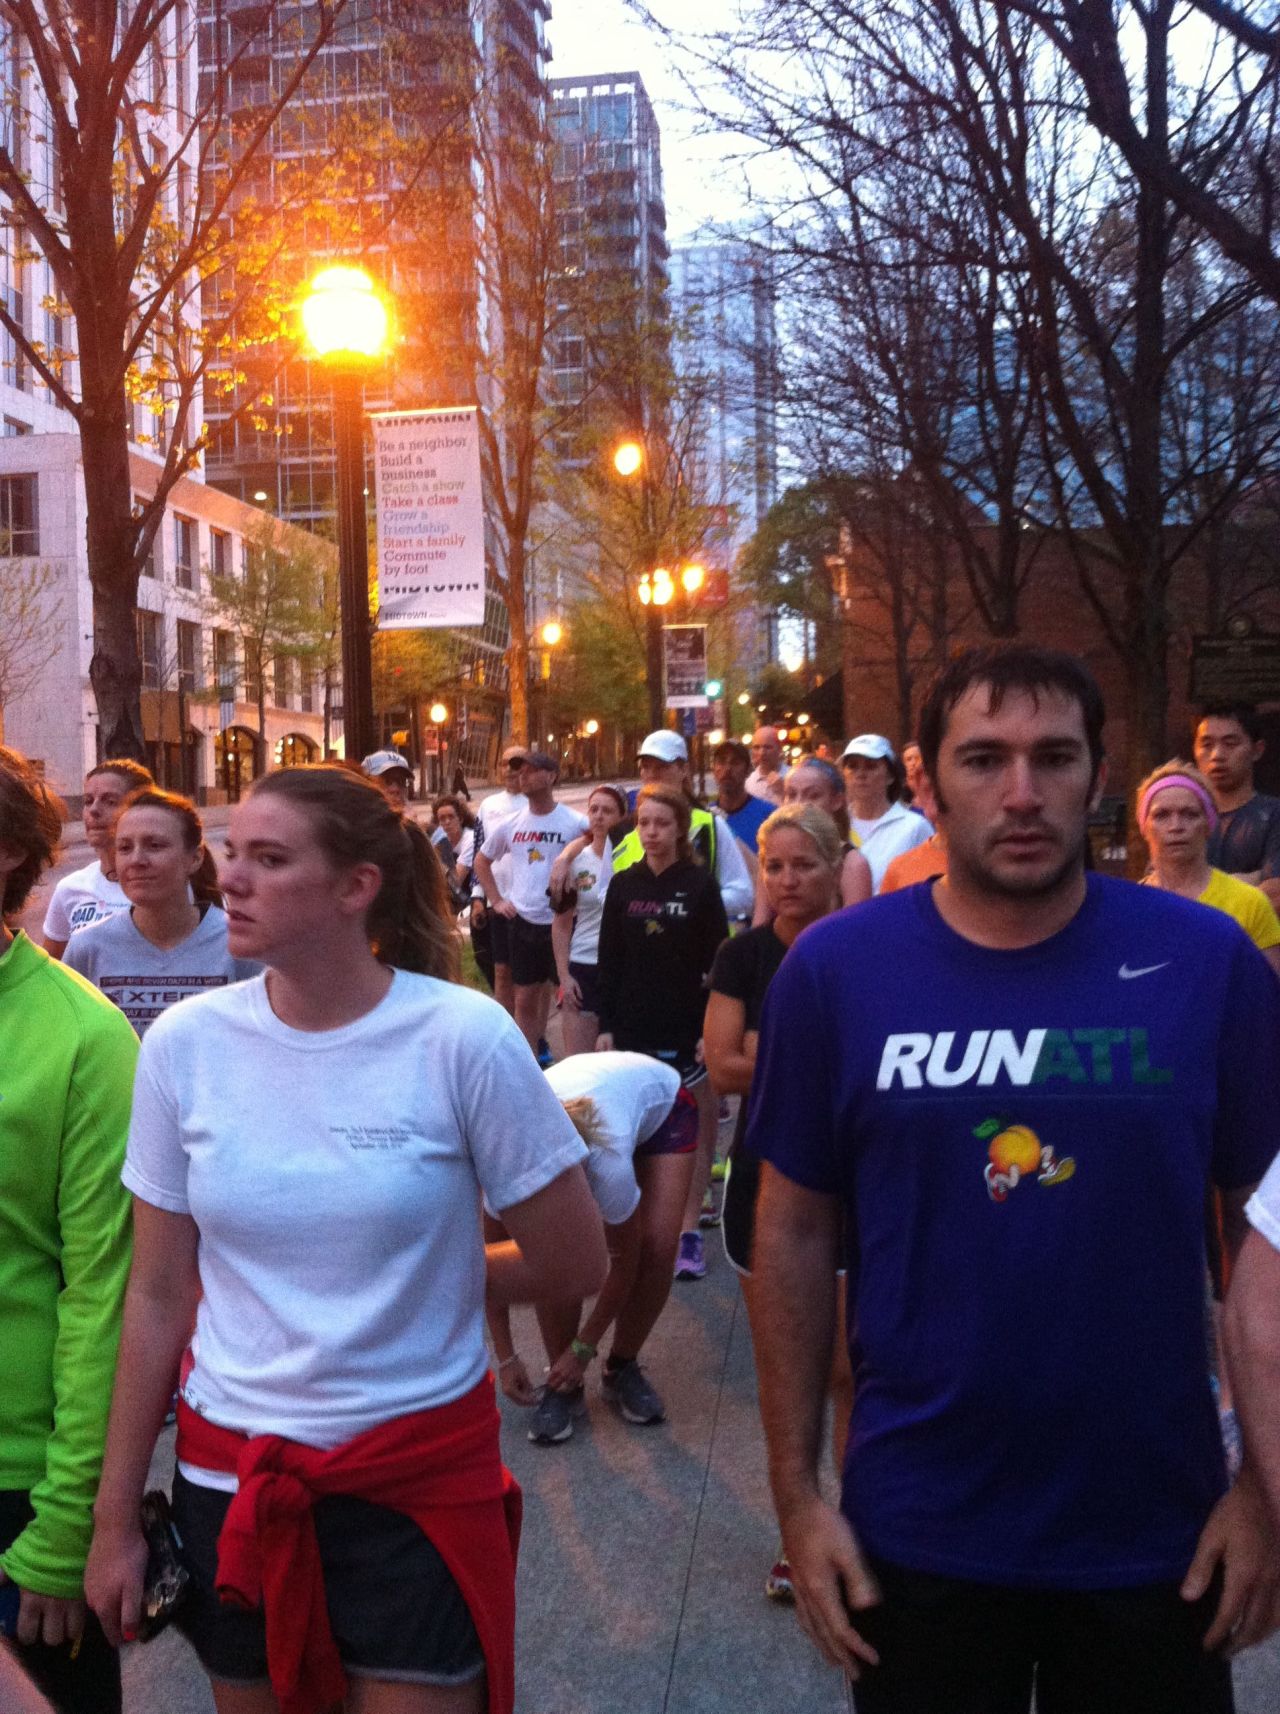 <a href="http://ireport.cnn.com/docs/DOC-957408">CNN staff member Emily Smith</a> photographed Atlanta runners Tuesday morning running a silent mile in memory of those killed and injured in Monday's Boston Marathon blasts. "It was an emotional morning, with many runners wearing Boston sports teams logos," she says. 